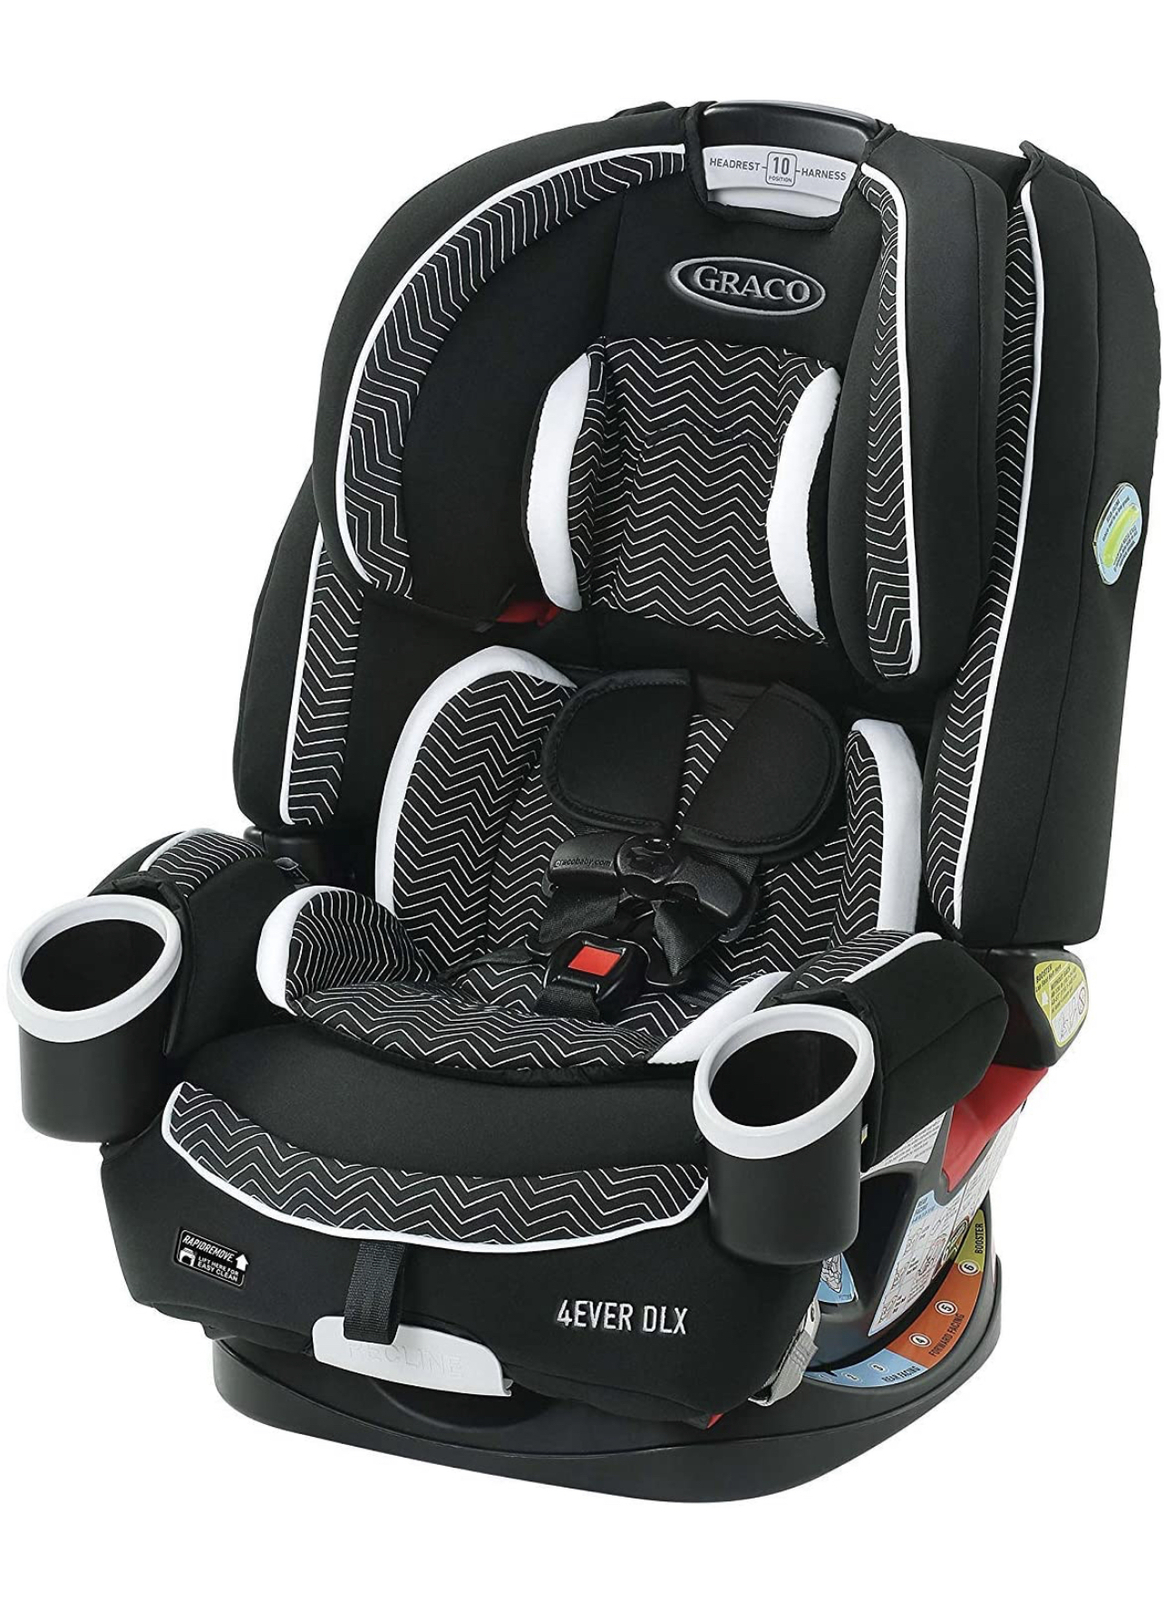 Graco 4ever Dlx 4 In 1 Car Seat Zagg Infant And 21 Similar Items